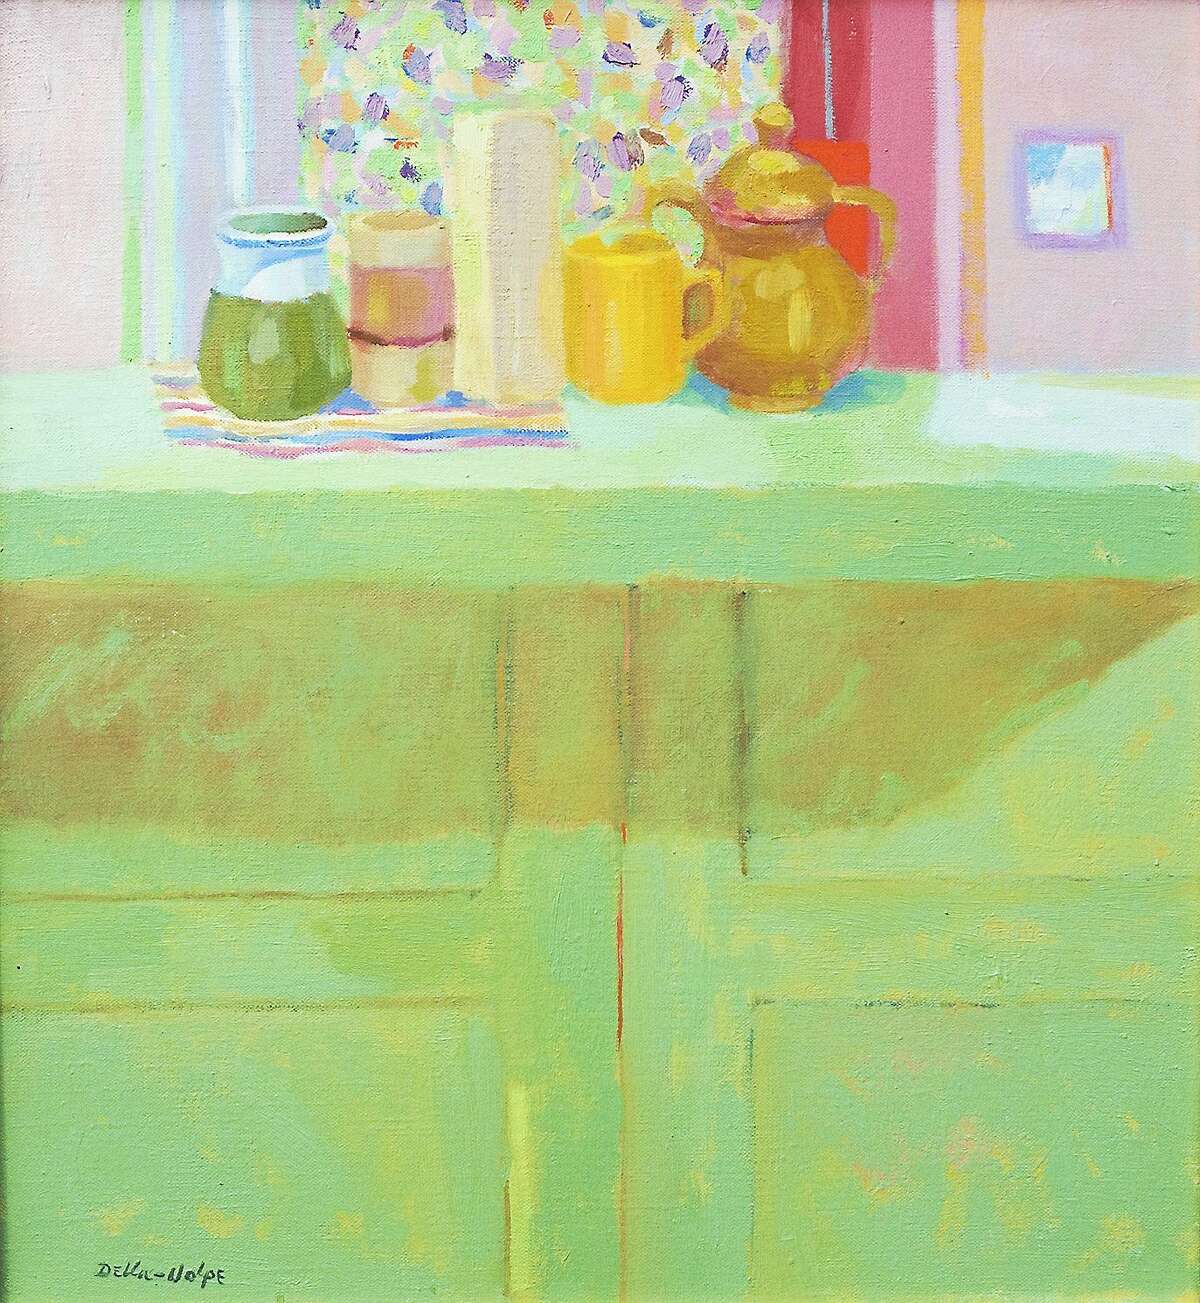 Image courtesy of the artist "Still Life on Green Cabinet" by Ralph Della-Volpe.